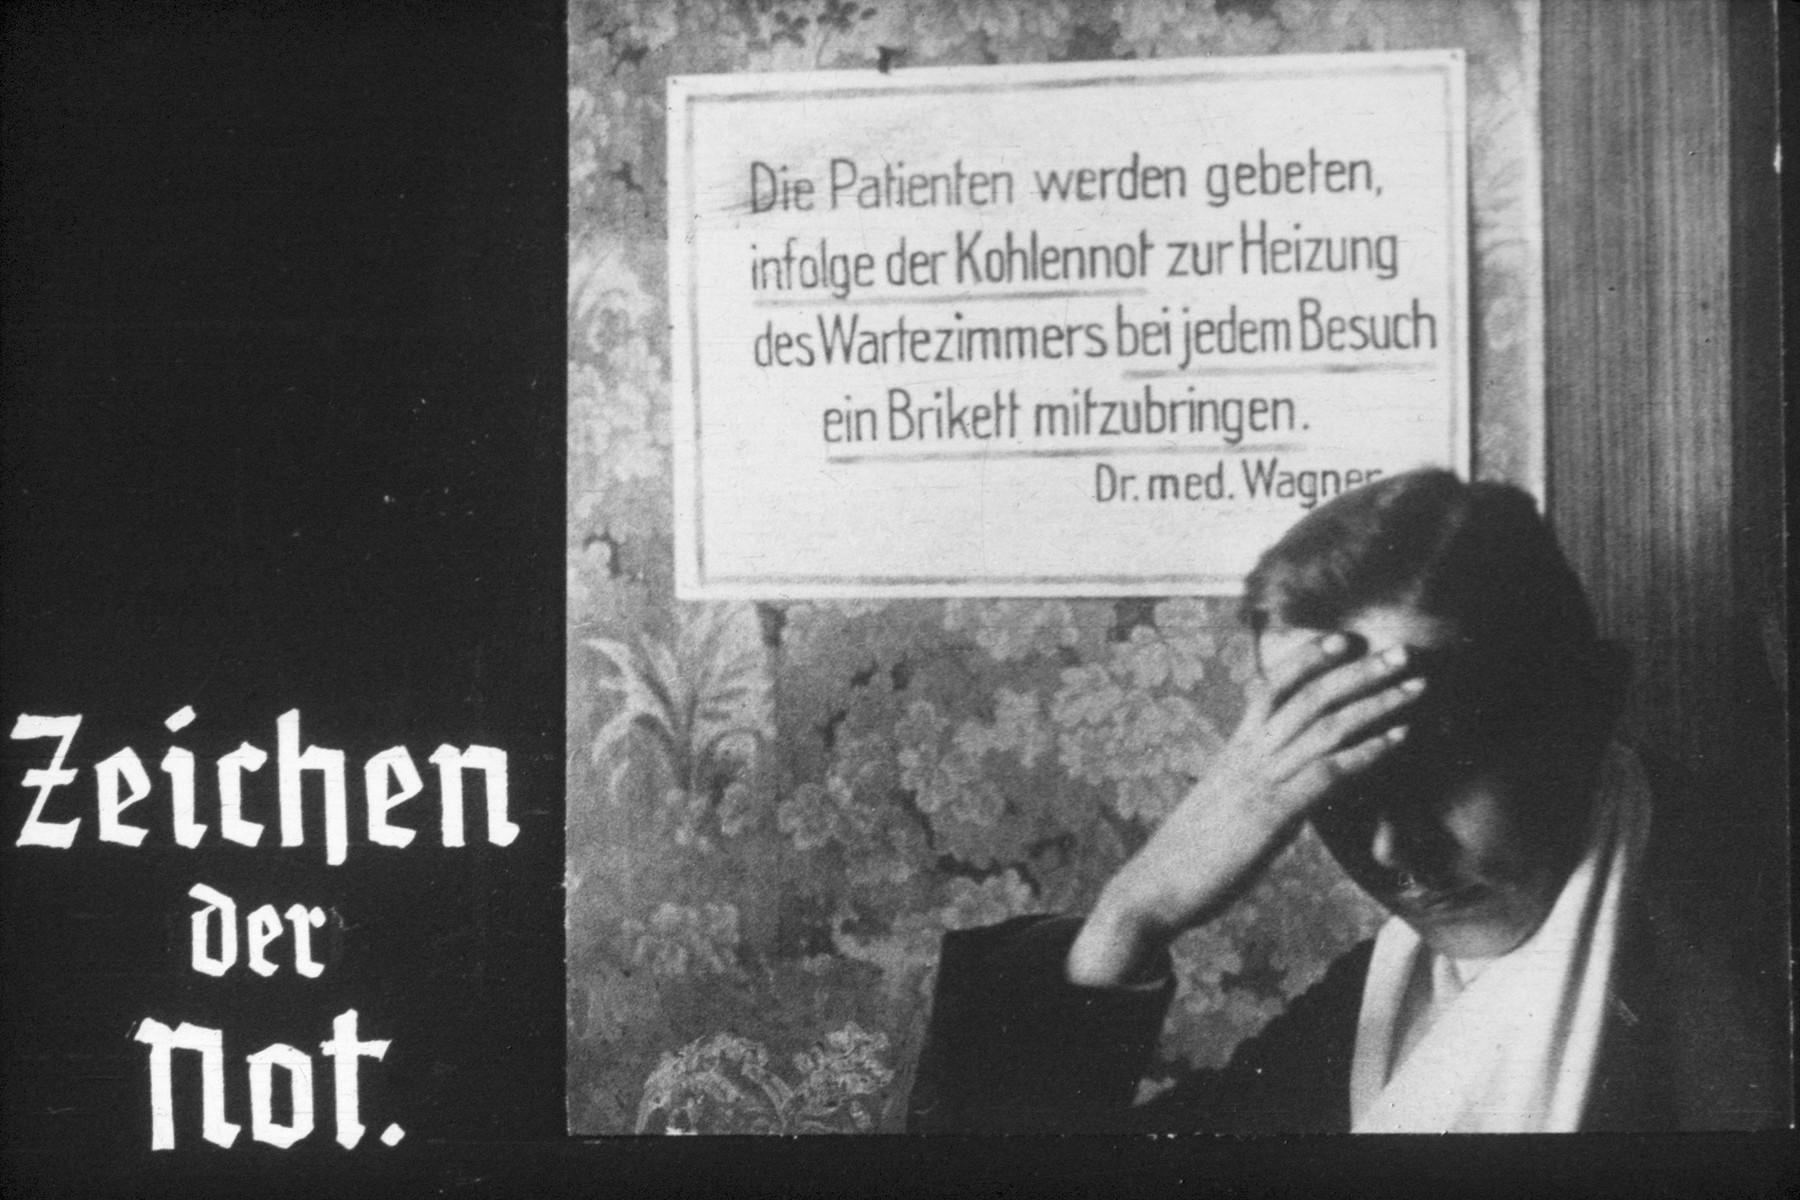 20th slide from a Hitler Youth slideshow about the aftermath of WWI, Versailles, how it was overcome and the rise of Nazism.

Zeichen der Not
(Signs of poverty)

Sign in photo reads: 
Die Patienten werden gebeten infolge der Kohlennot zur Heizung des Wartezimmers bei jedem Besuch ein Brikett mitzubringen

The patients are asked due to shortage of coal to heat the waiting room, to bring one briquette with each visit.